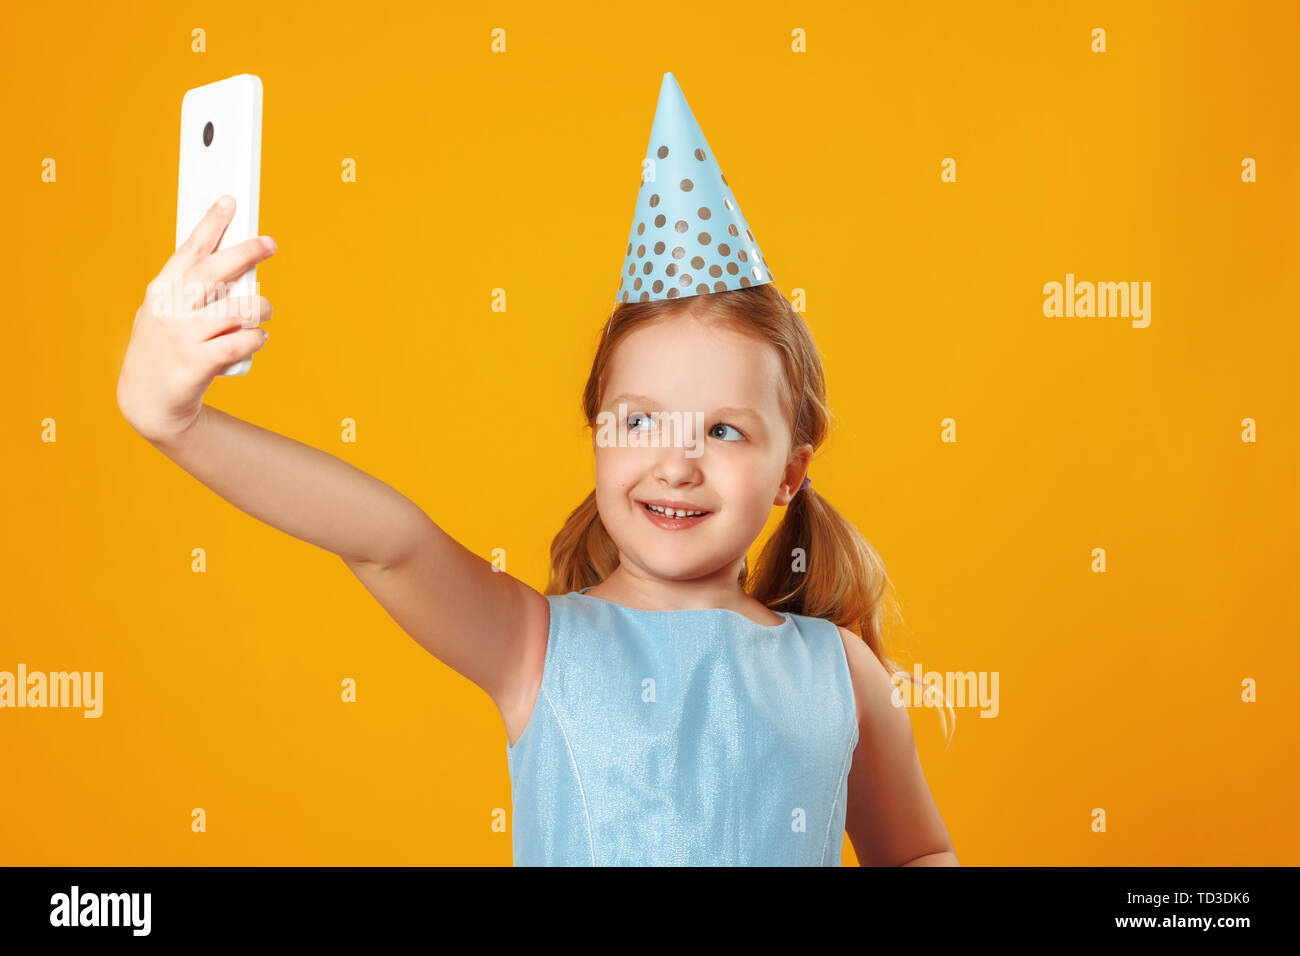 Cheerful little girl celebrates birthday. The child holds the phone, takes a selfie. Closeup portrait on yellow background. Stock Photo